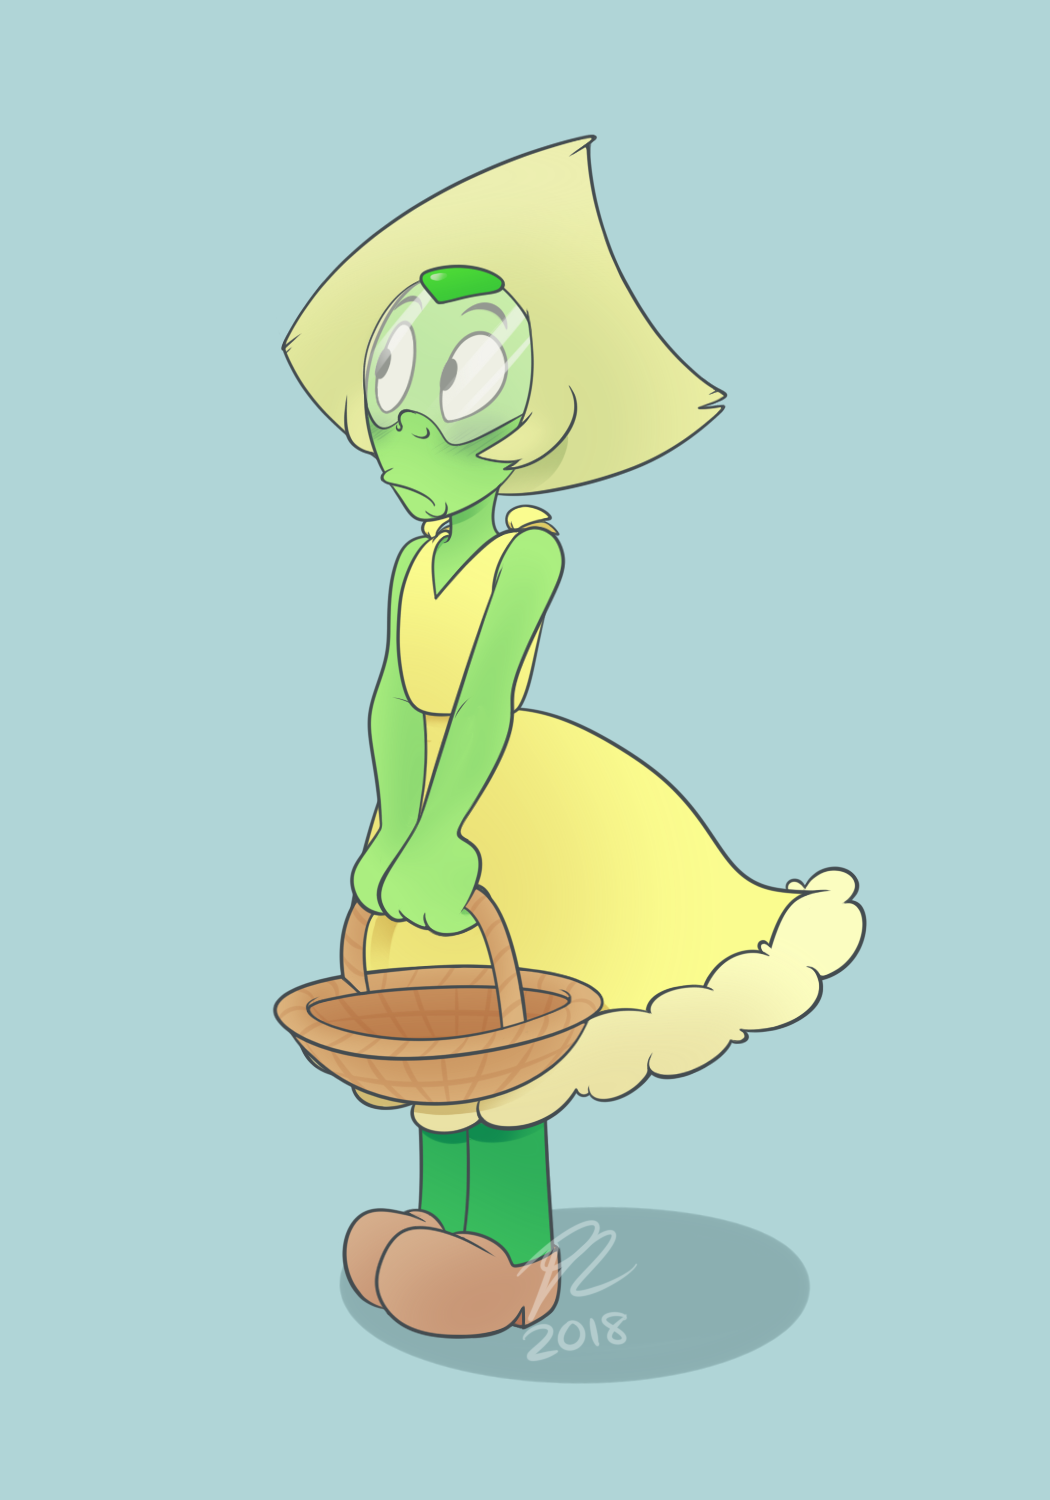 Late to the party, but Peridot in that yellow sun dress was adorable